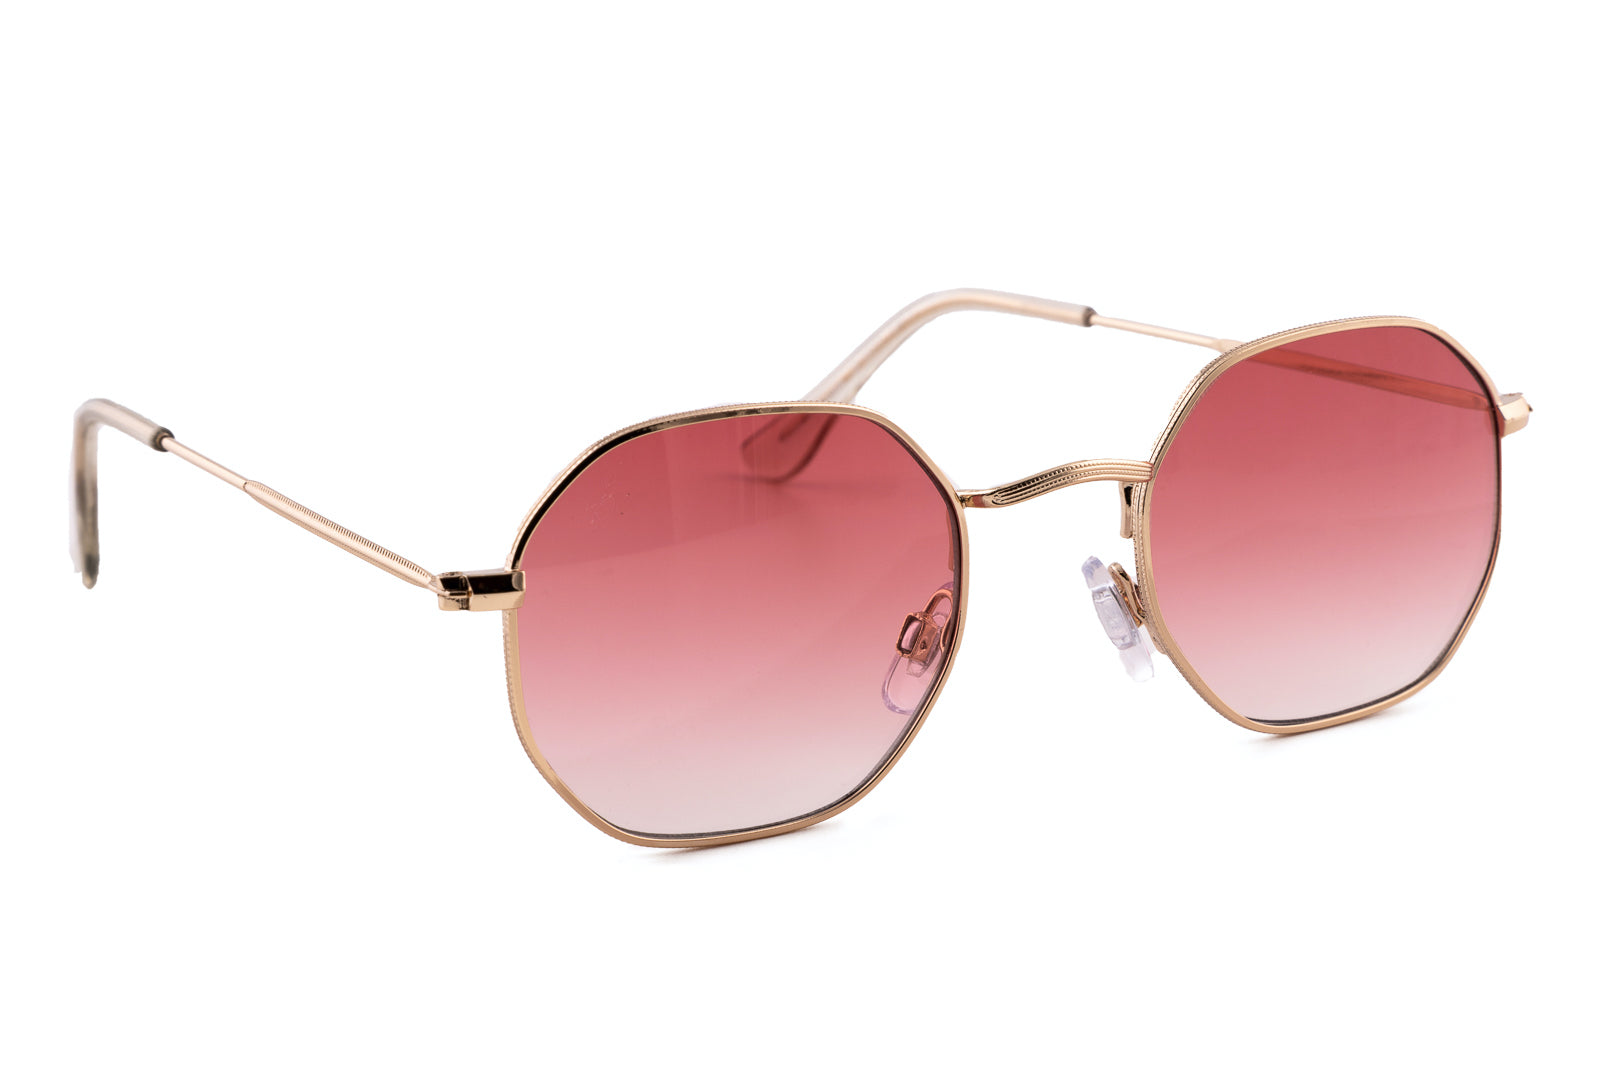 GOLD ROUND FRAME WITH PINK GRAD LENSES